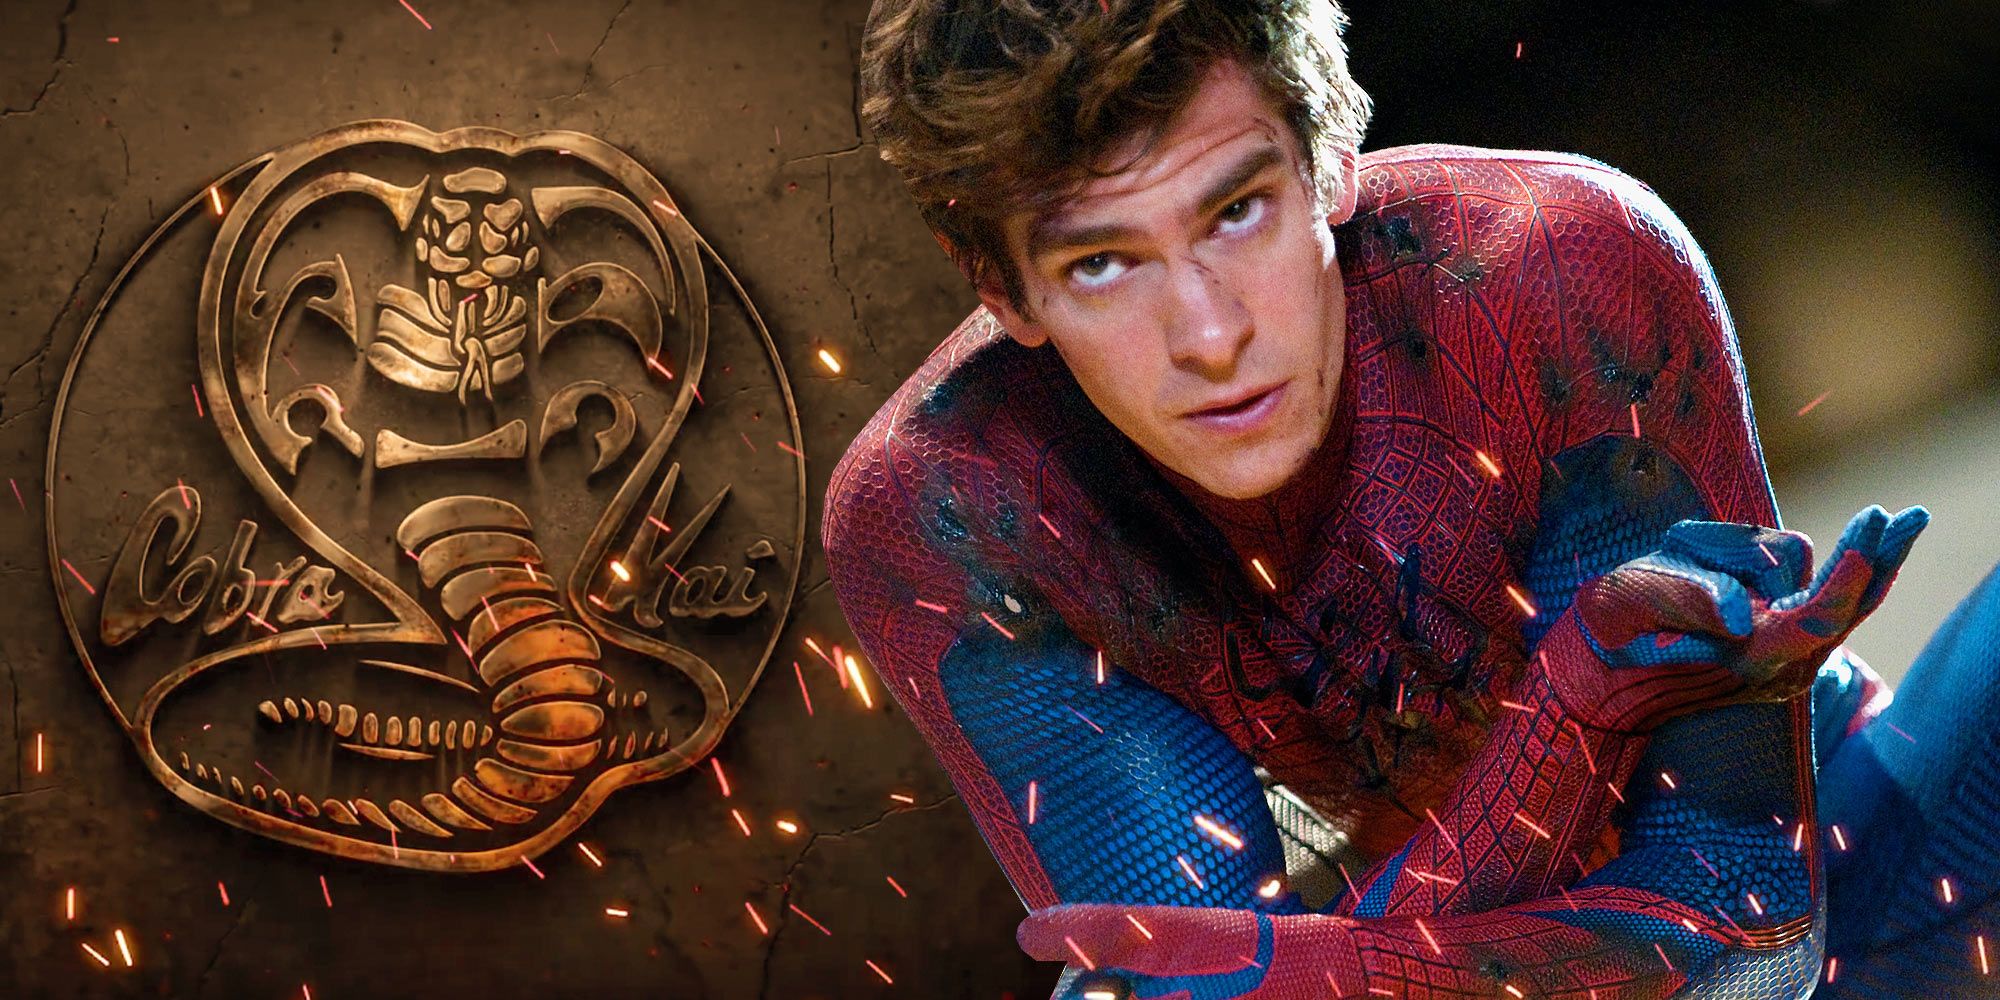 Andrew Garfield In Cobra Kai Season 6? Who Showrunners Would Cast Him As